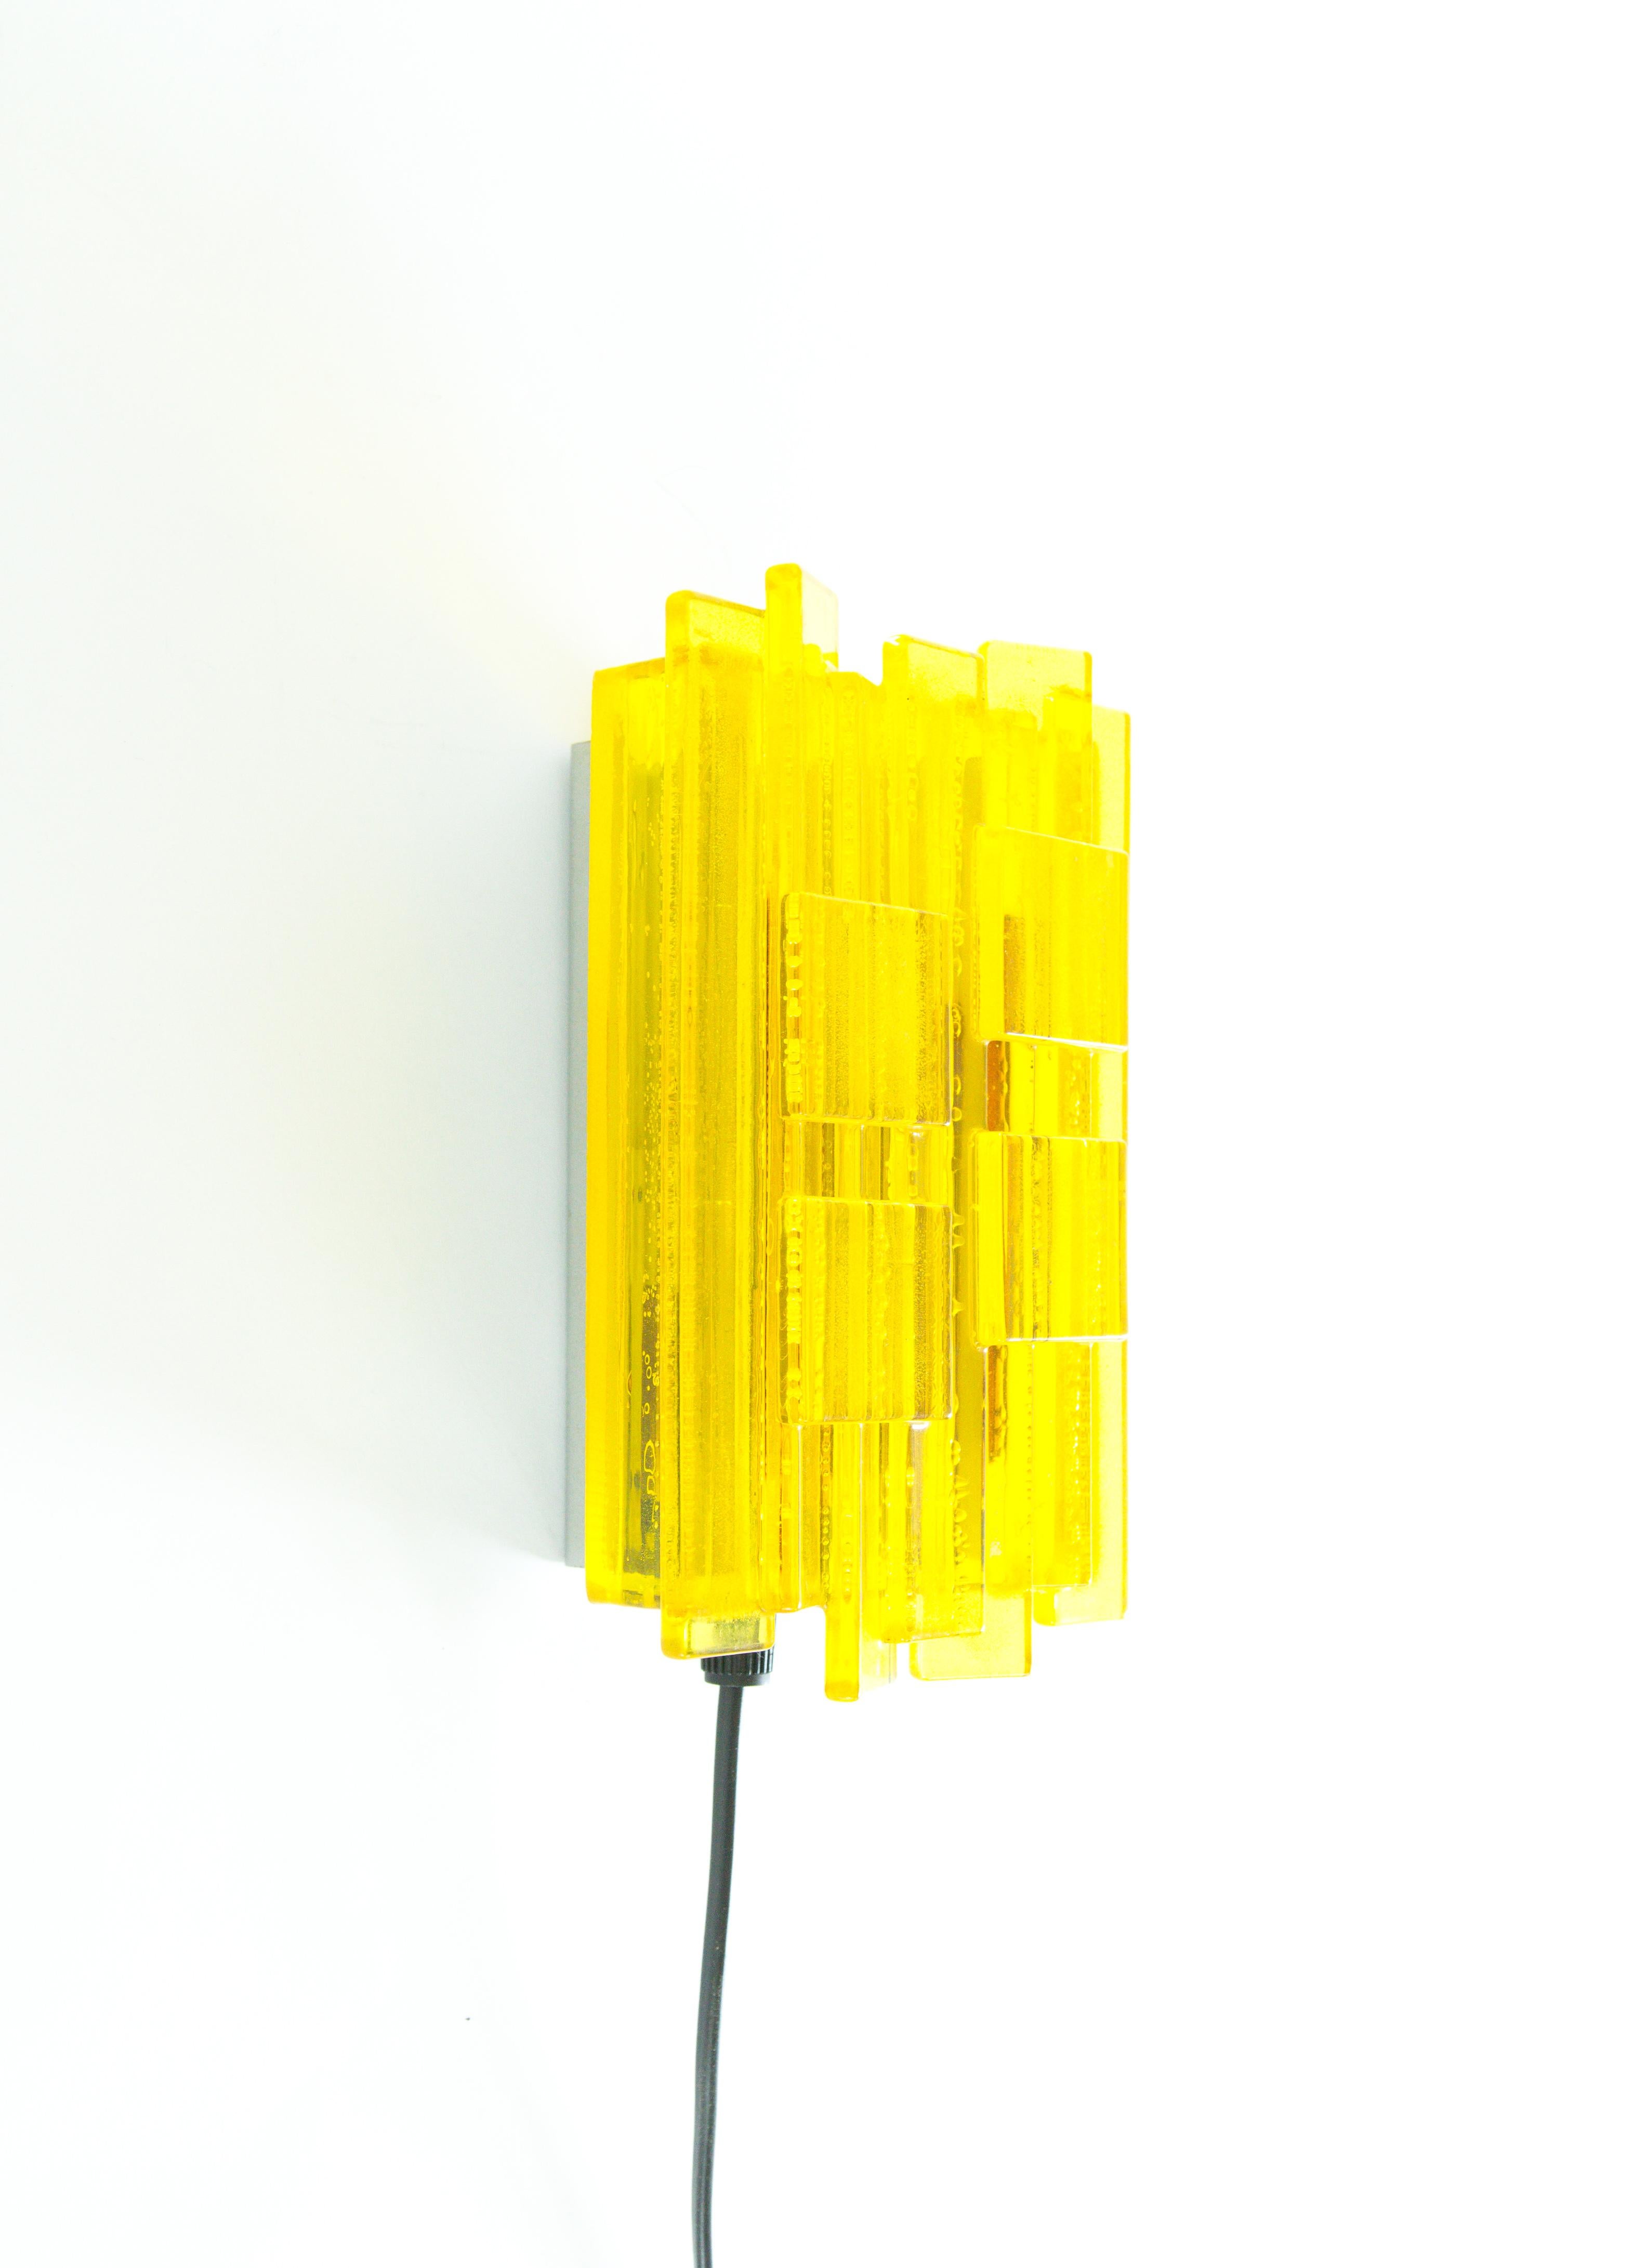 Danish Pair of Acrylic Yellow Wall Lamps by Claus Bolby for Cebo Industri, 1960s